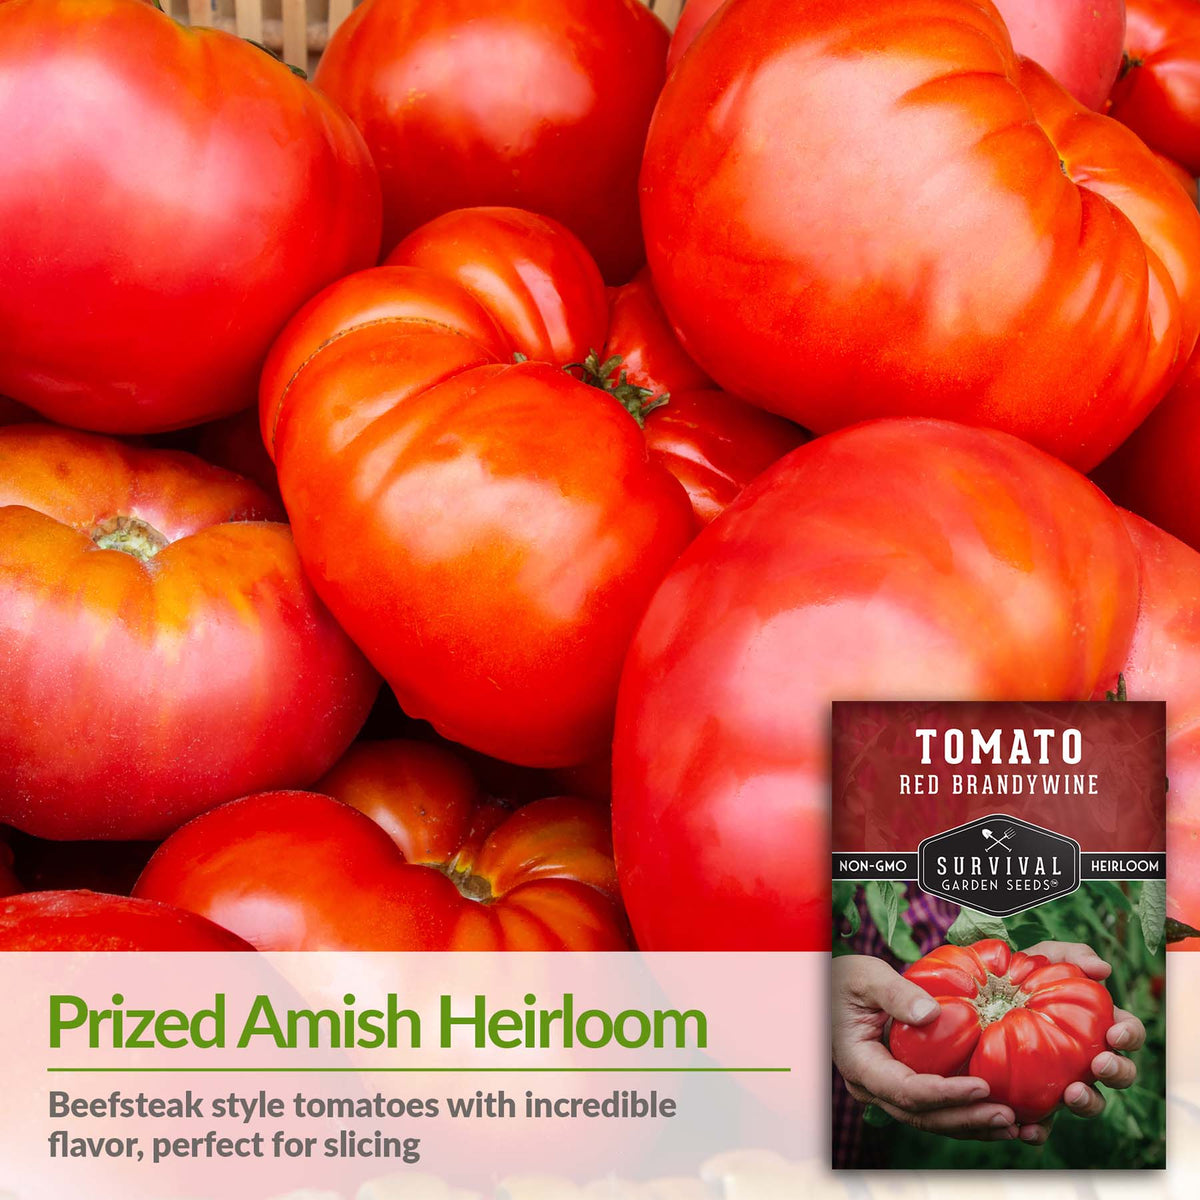 Brandywine Red is an Amish heirloom tomato variety